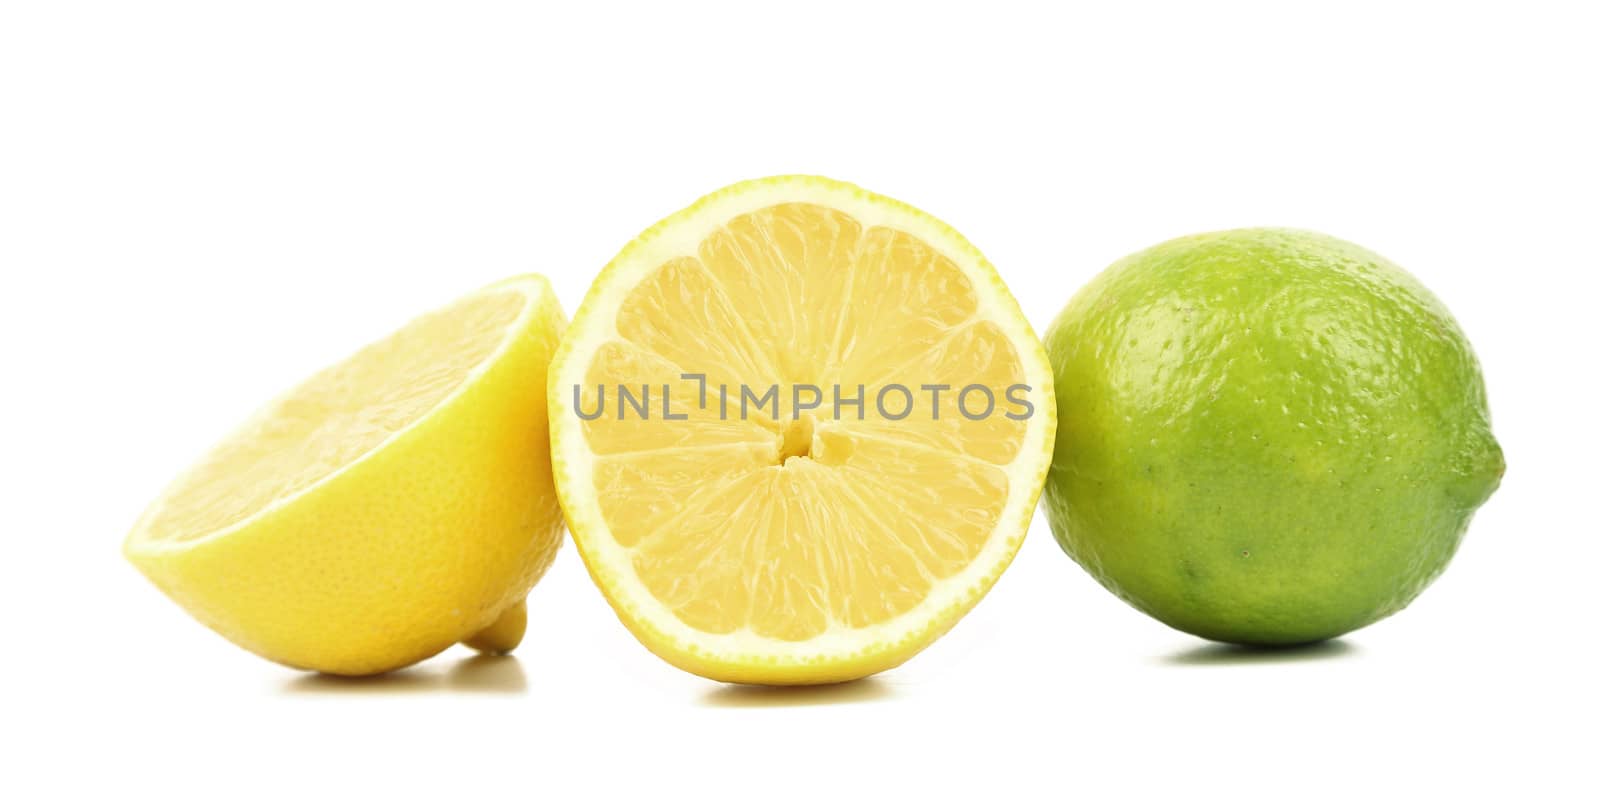 Lime and lemon slices. by indigolotos